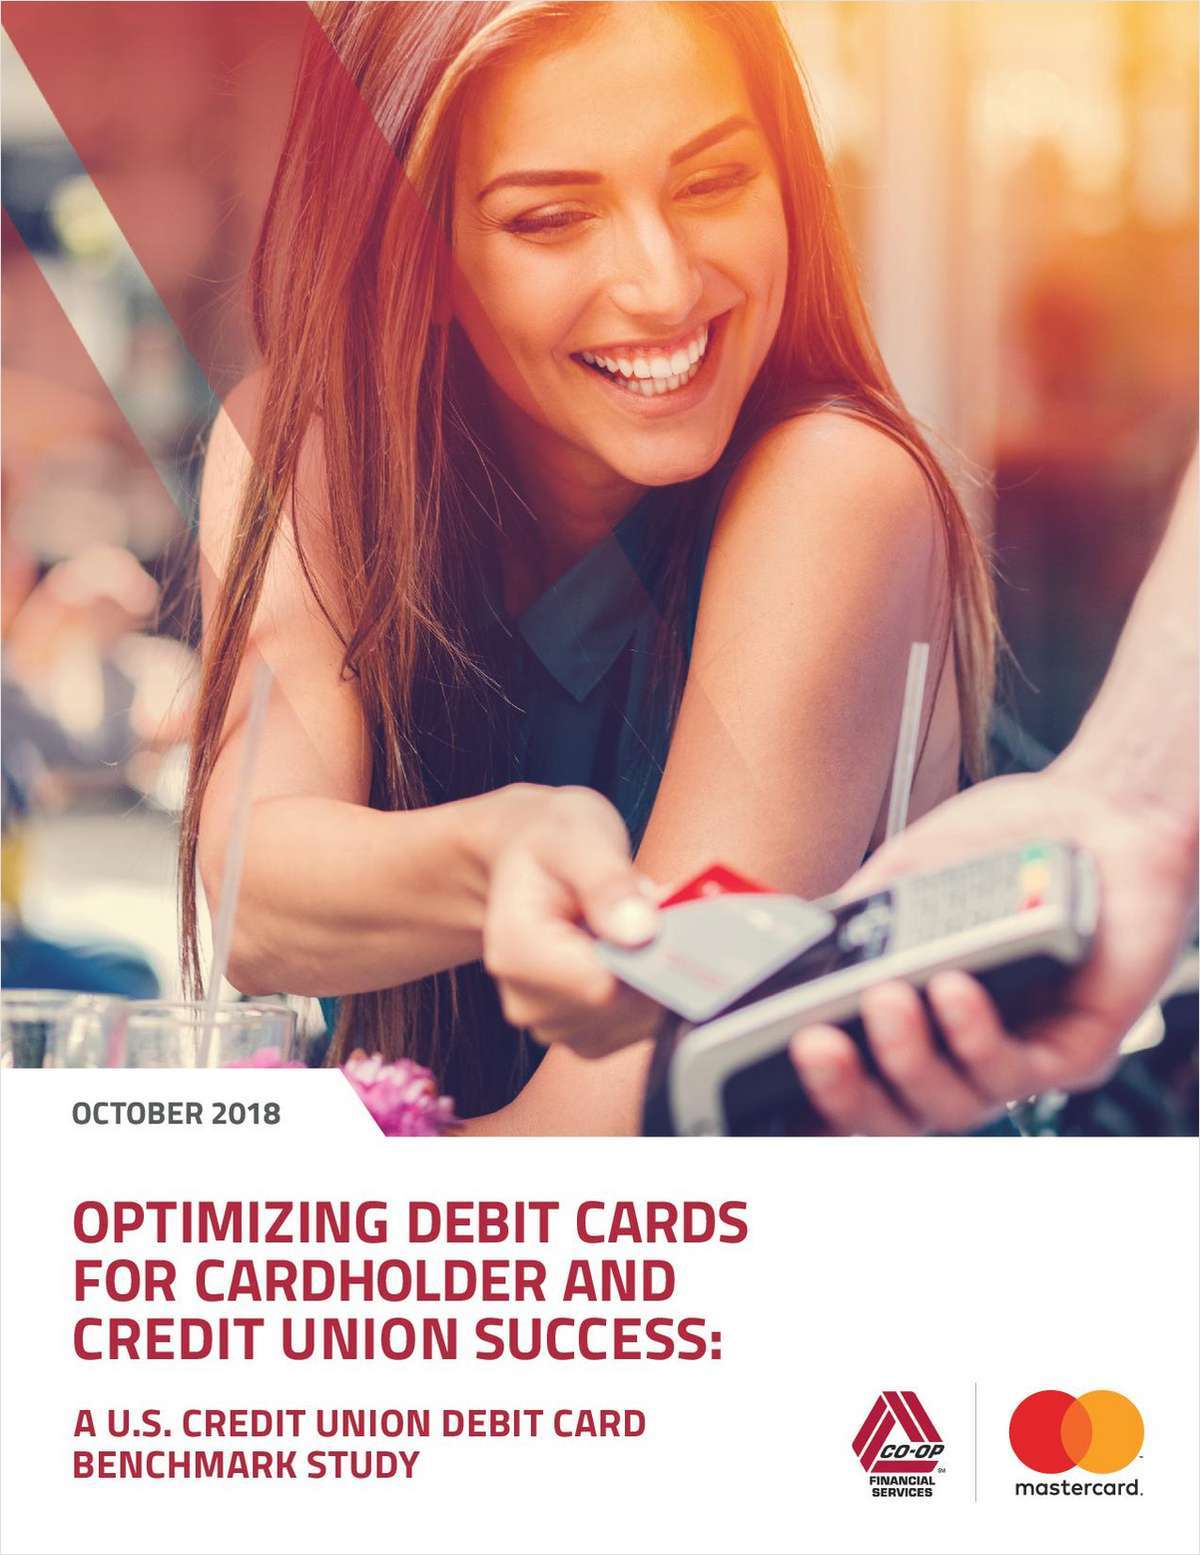 Optimizing Debit Cards for Cardholder and Credit Union Success